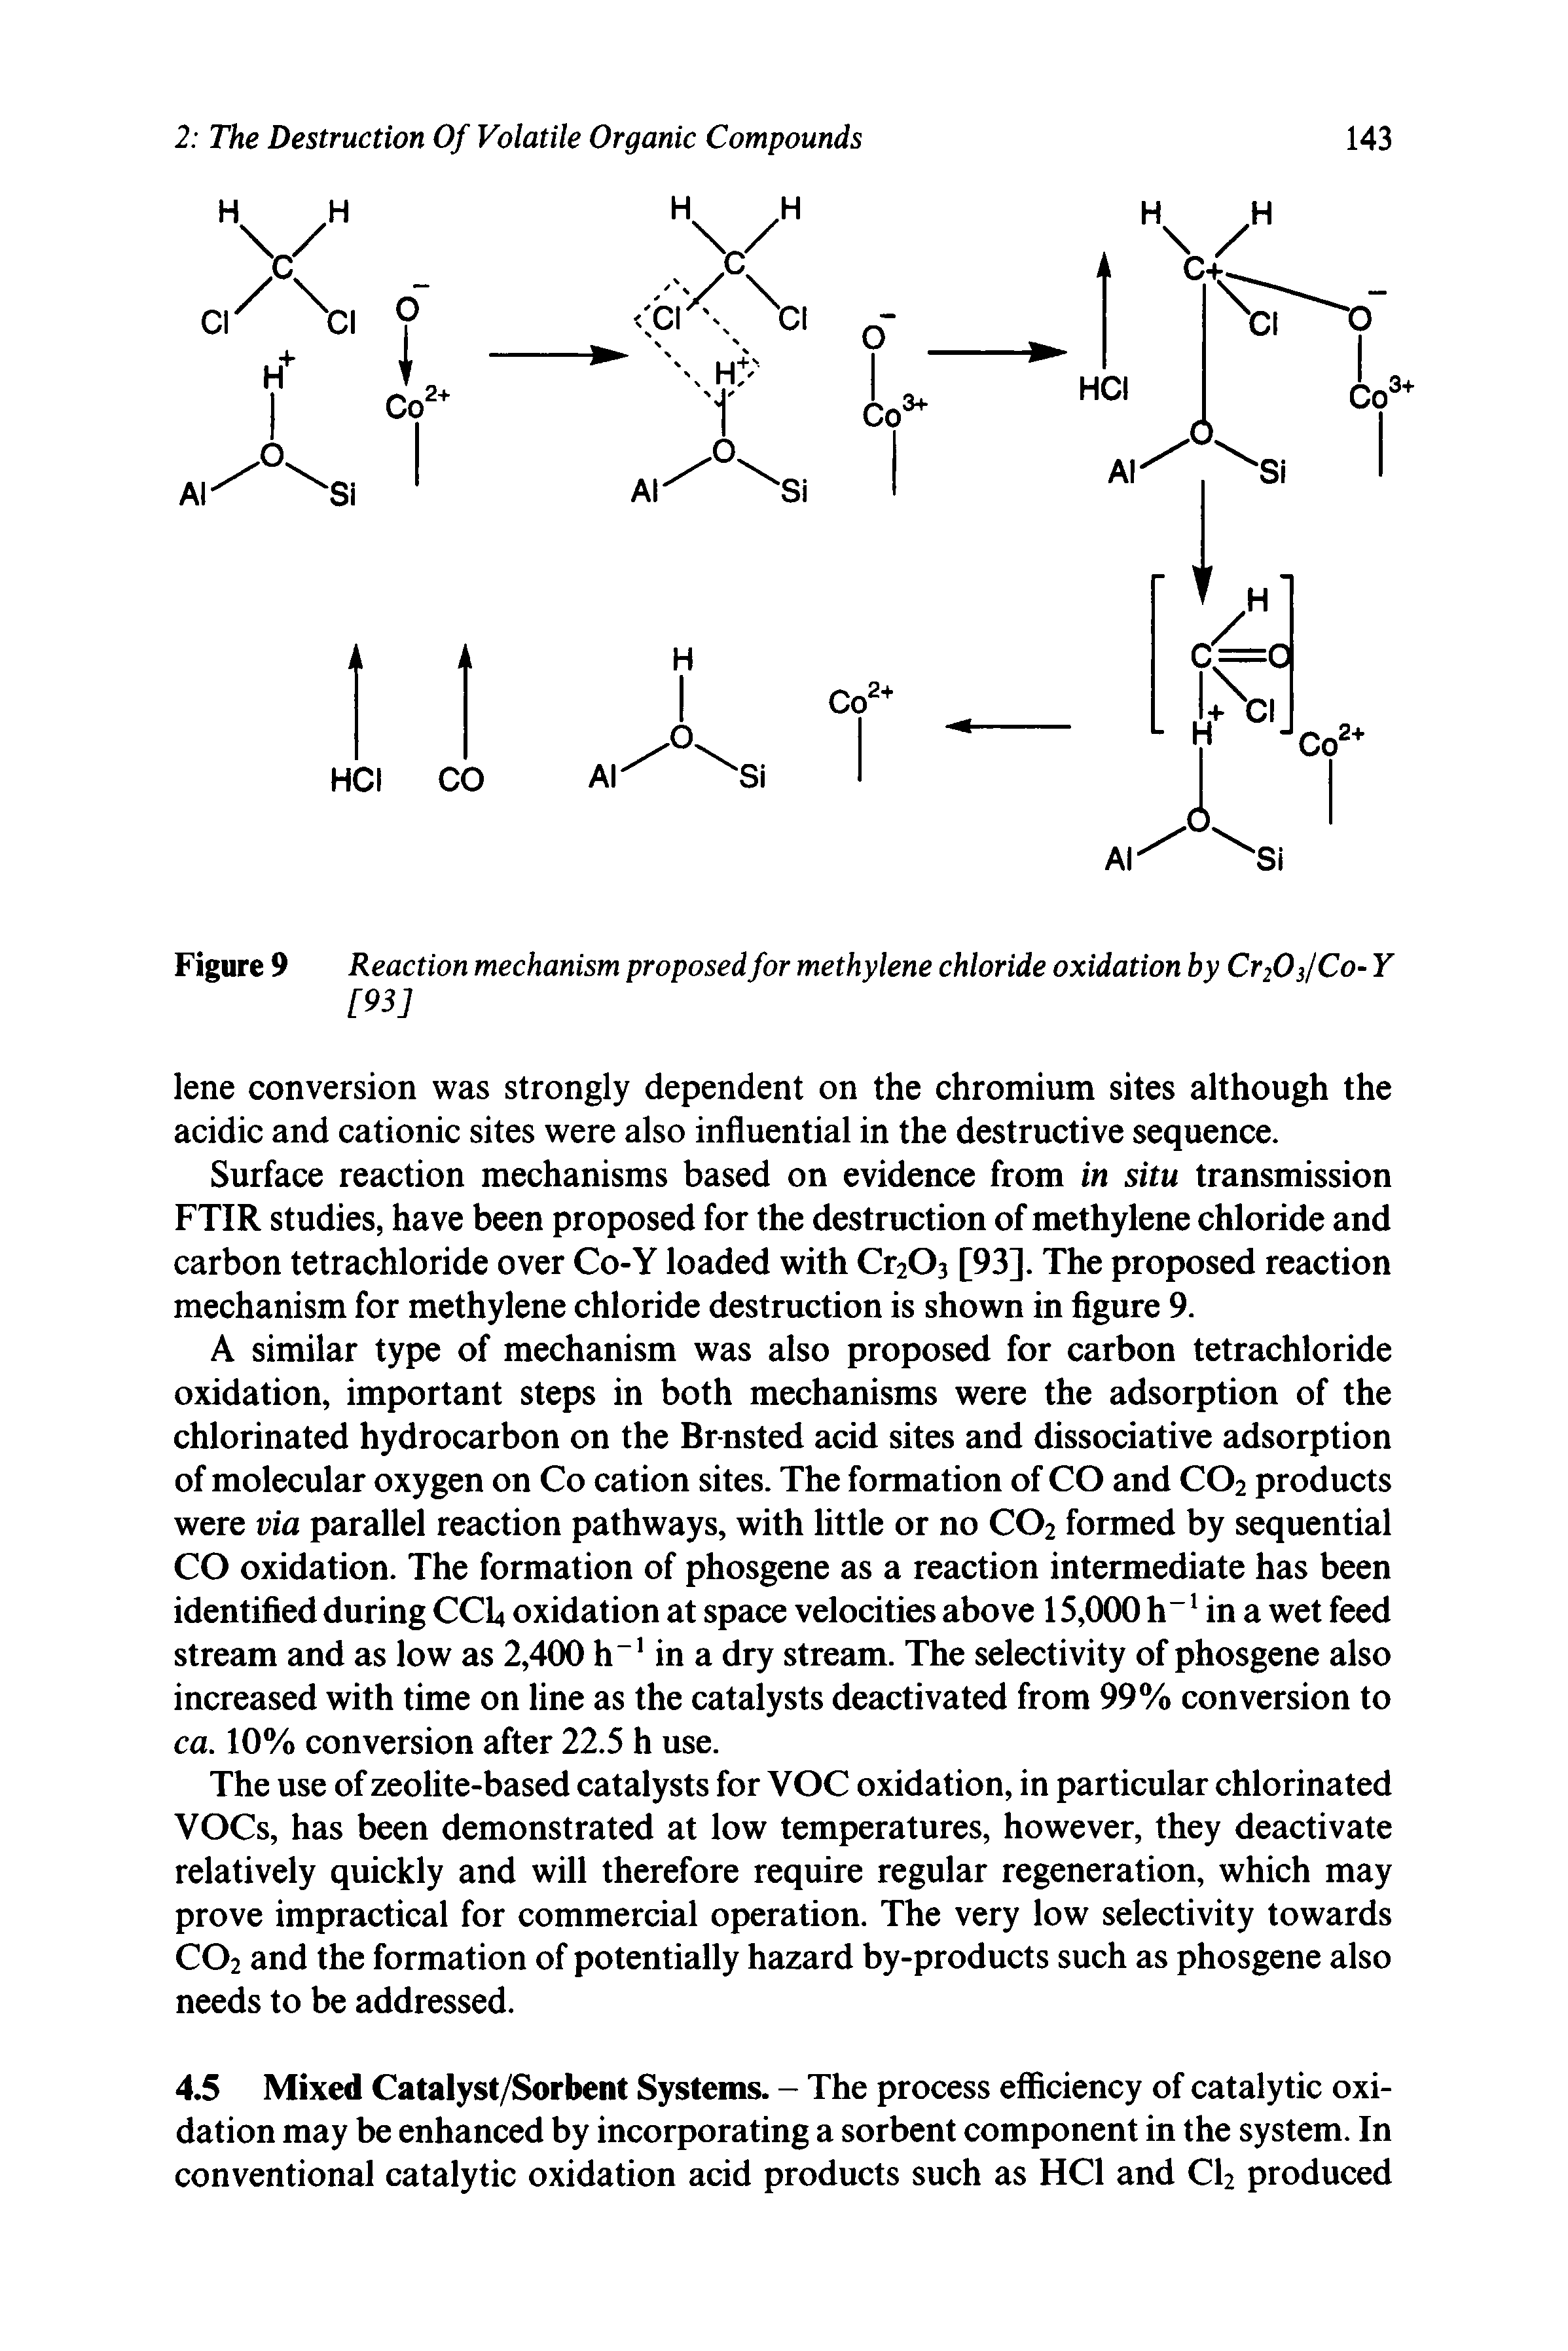 Figure 9 Reaction mechanism proposed for methylene chloride oxidation by Cr20 /Co- Y...